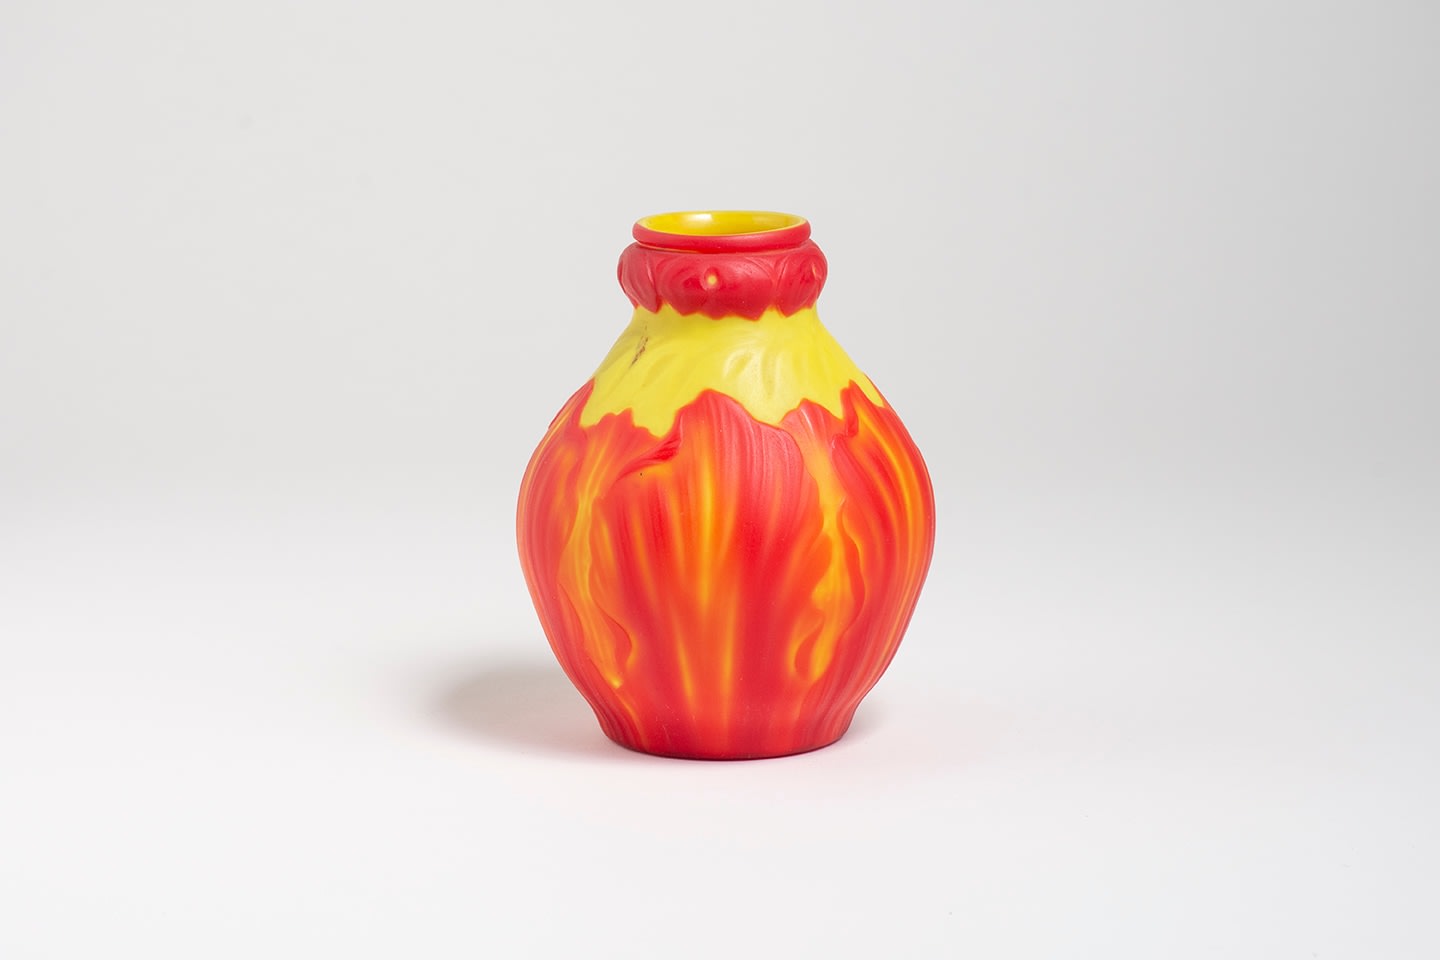 a cabinet vase in the cameo technique by tiffany studios, the base glass in bright yellow, the raised layer of red glass carved in the form of a fancy frilled or broken tulip with curling petals